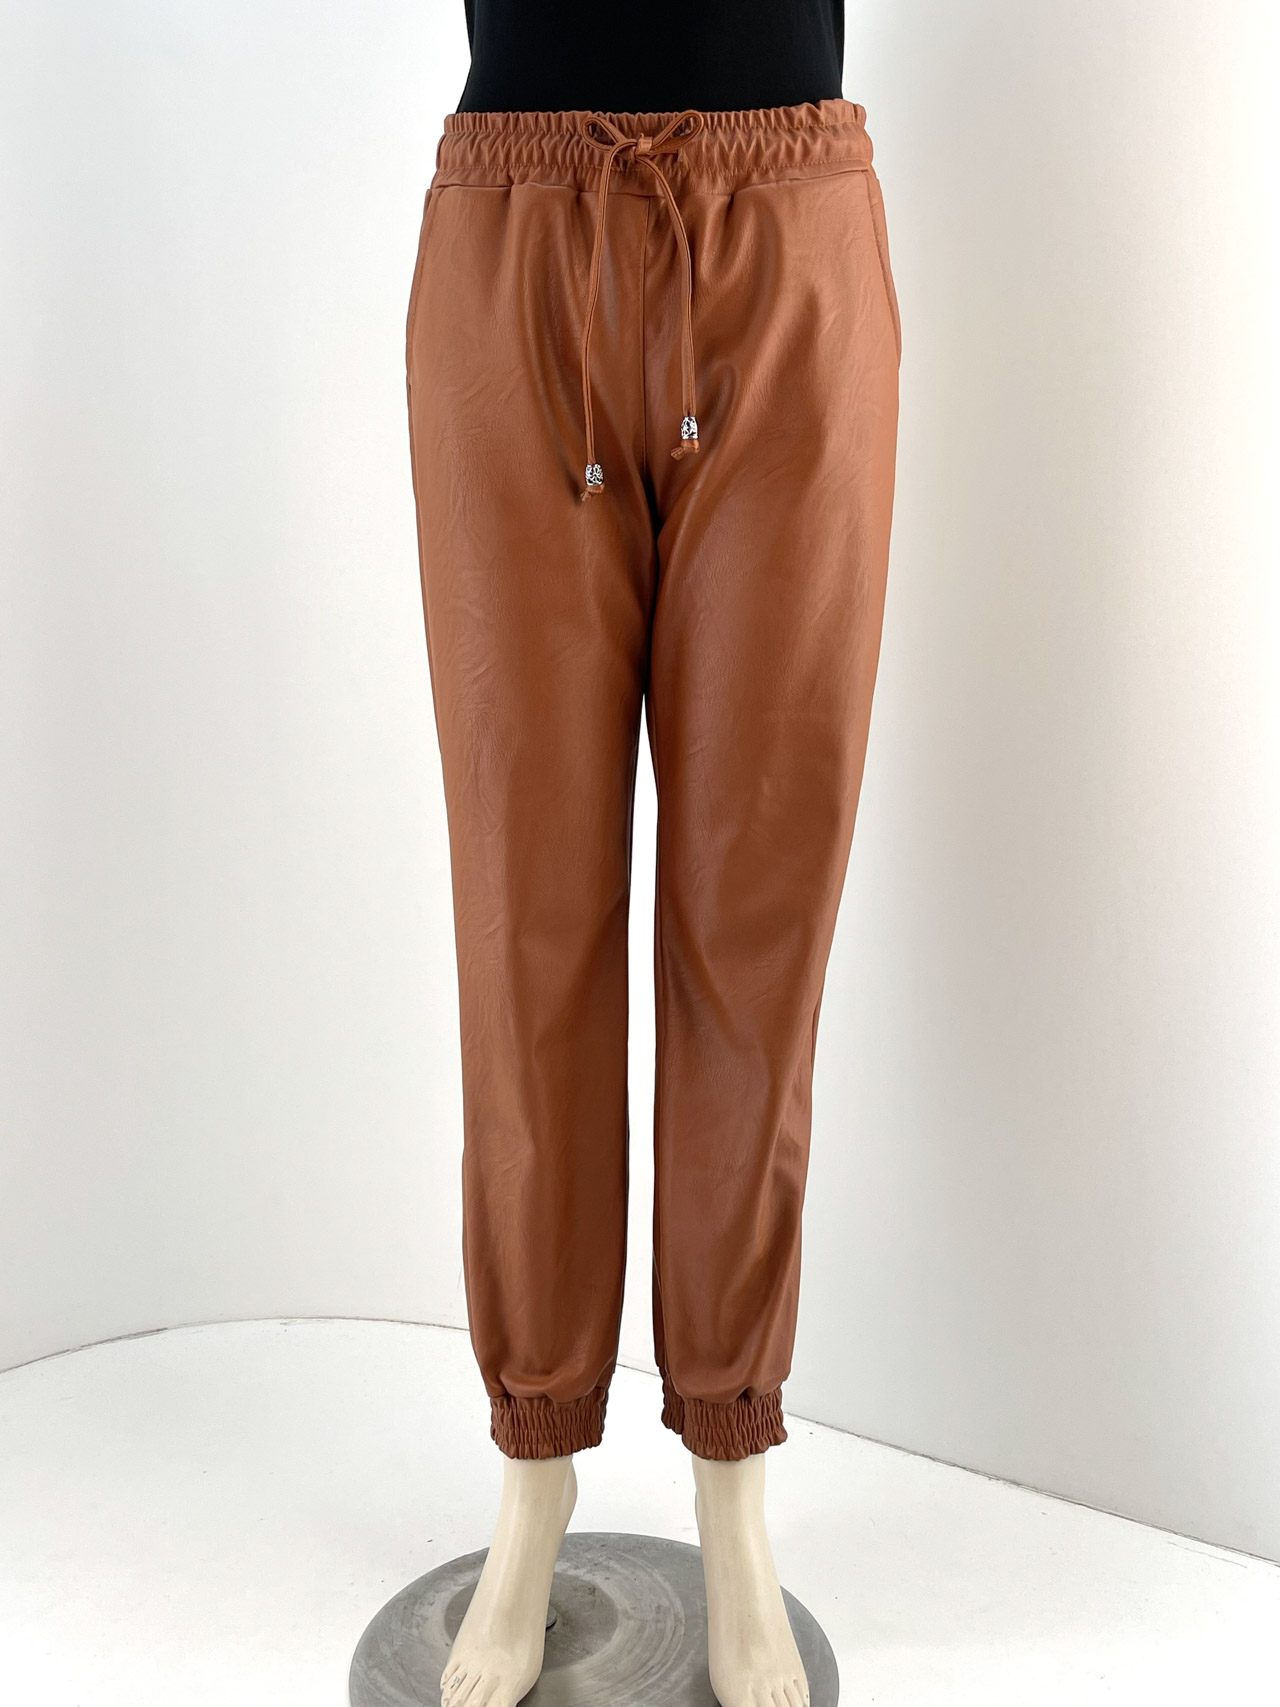 Leatherette pants female code 9283 front view